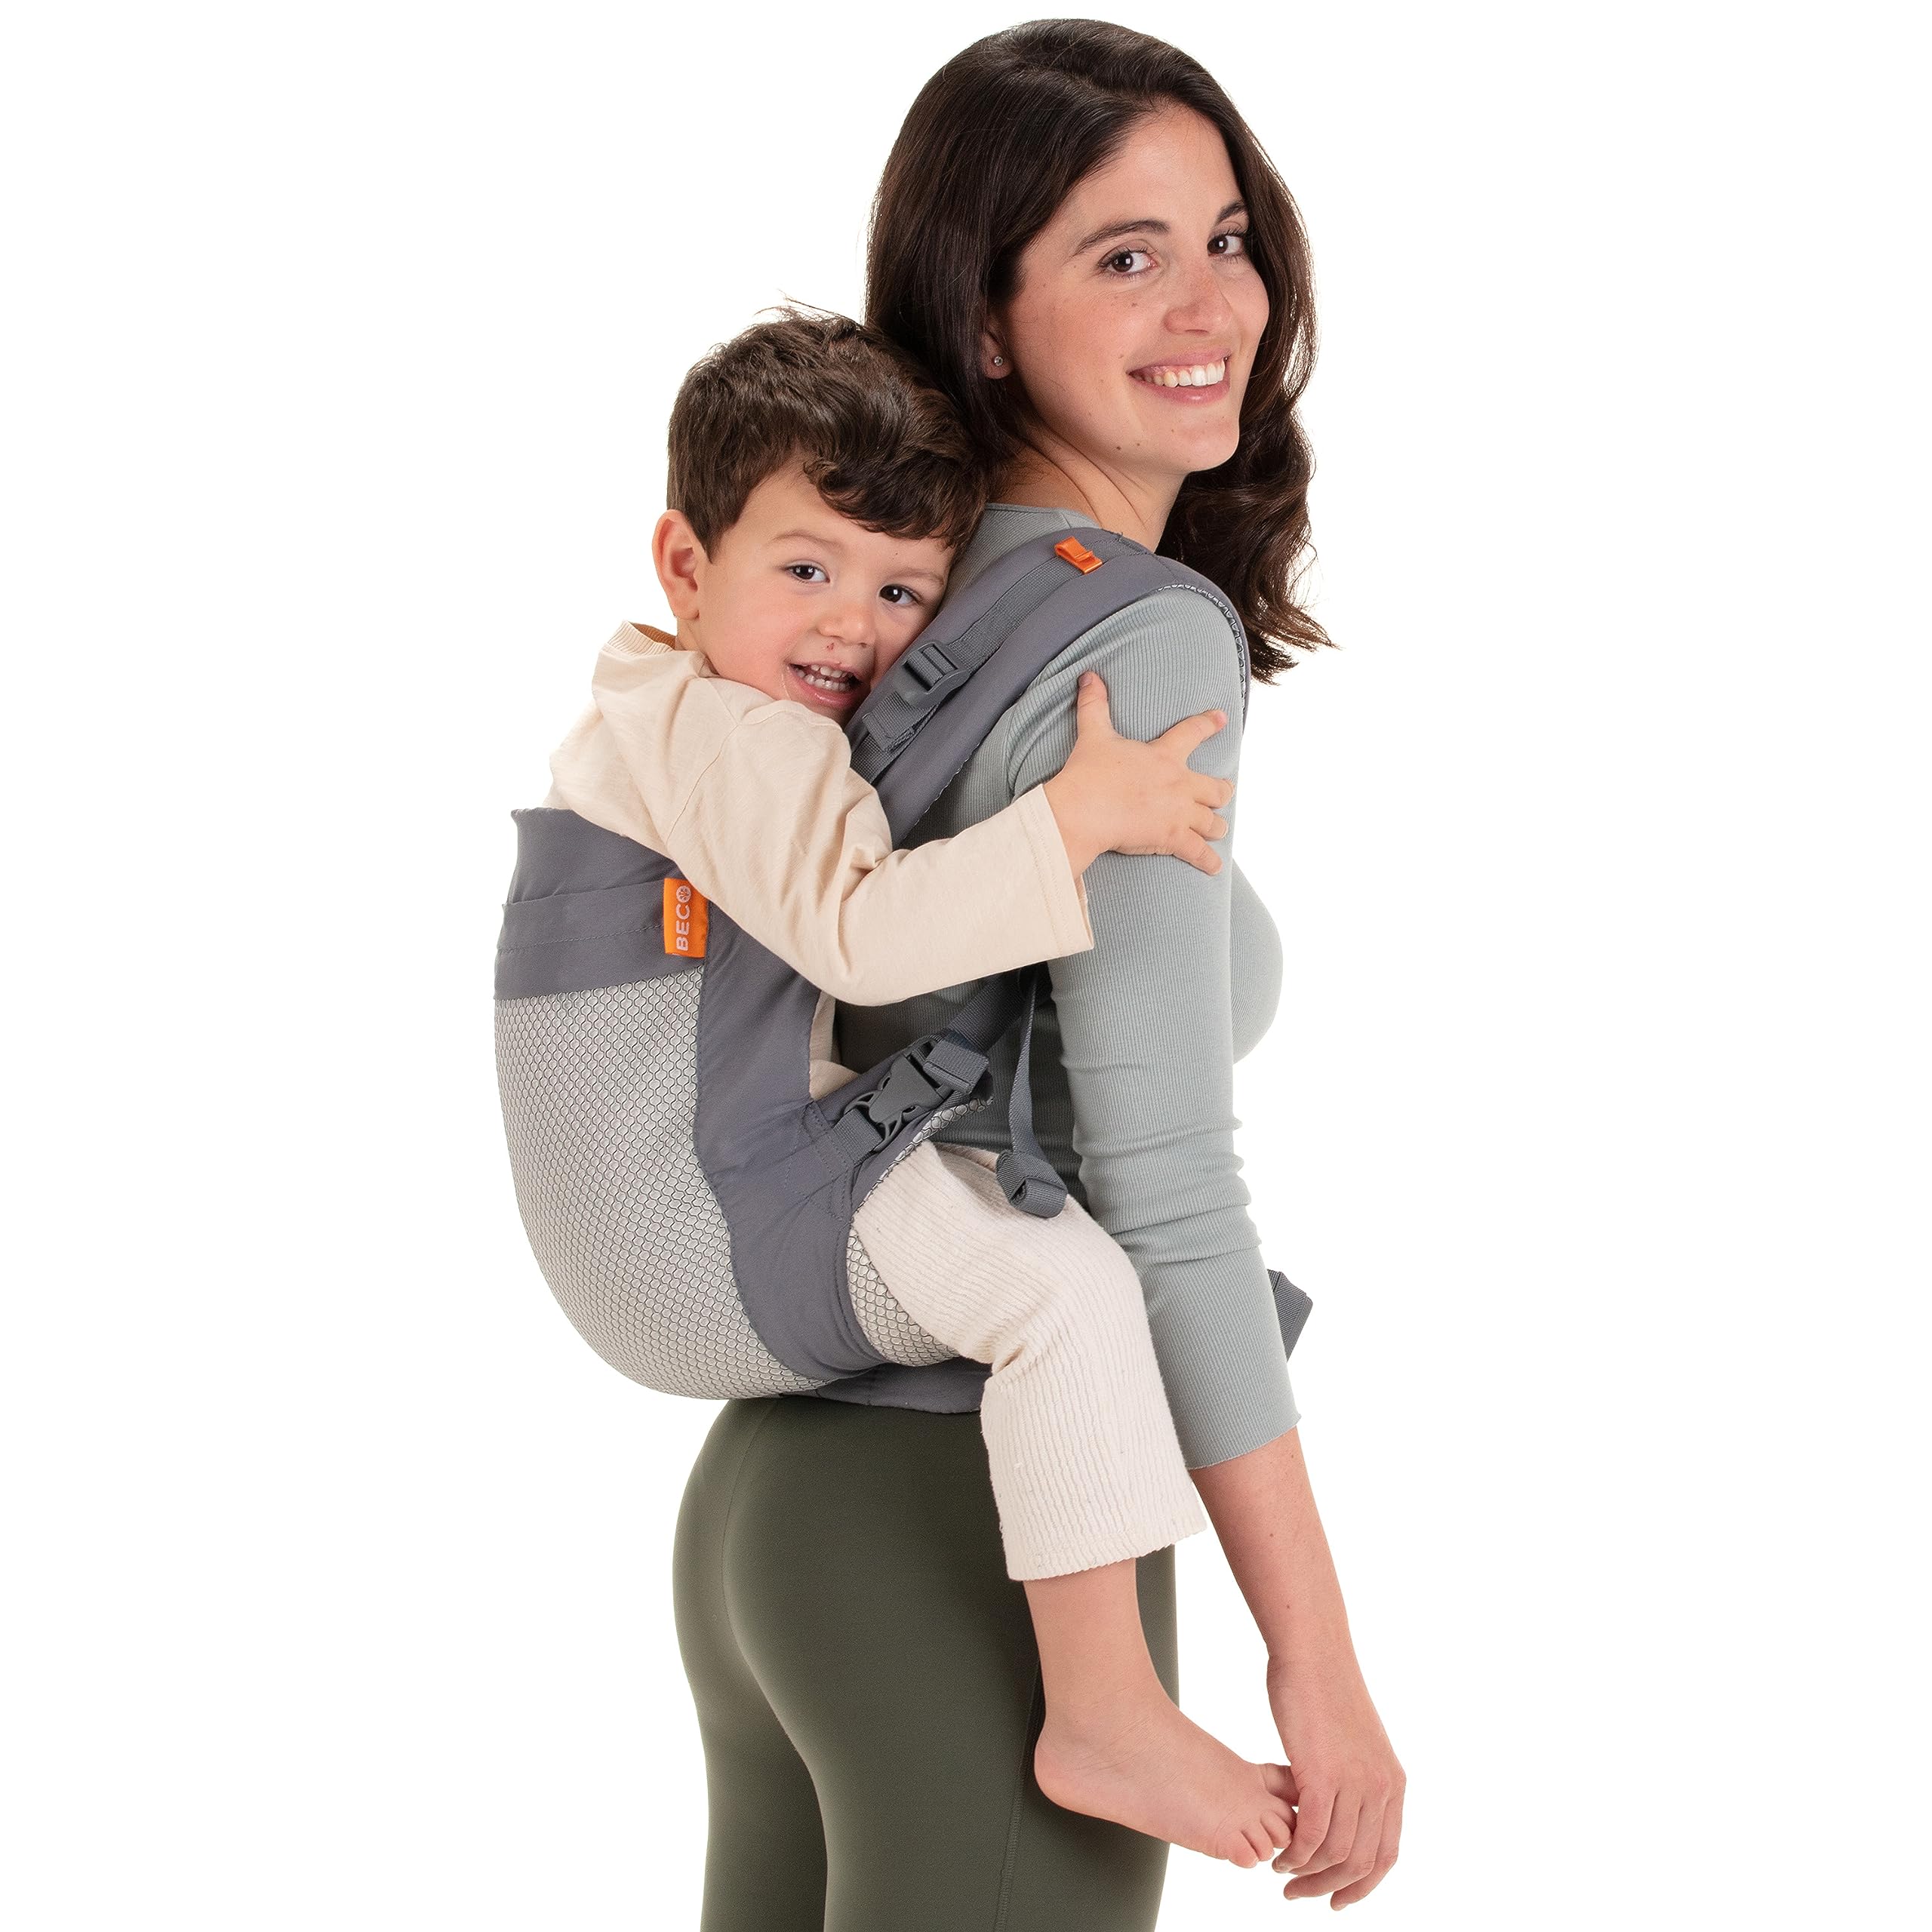 Beco Toddler Carrier with Extra Wide Seat - Toddler Carrying Backpack Style and Front-Carry - Lightweight & Breathable Child Carrier - Toddler Sling Carrier 20-60 lbs (Cool Dark Grey)